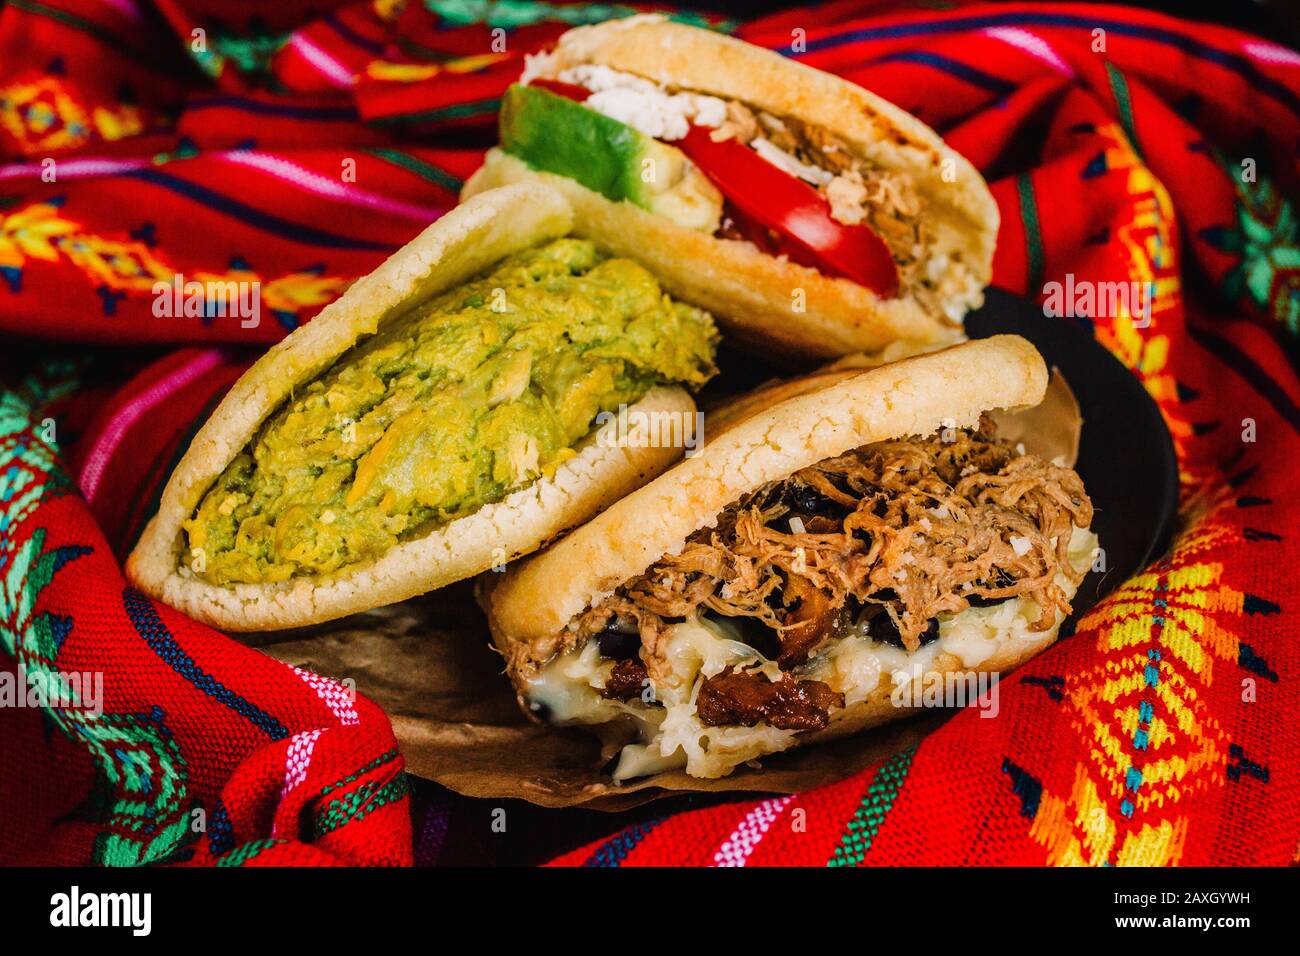 Venezuelan arepas on a colorful background, made with maize and filled with avocado, tomato, meat, cheese and black beans Stock Photo